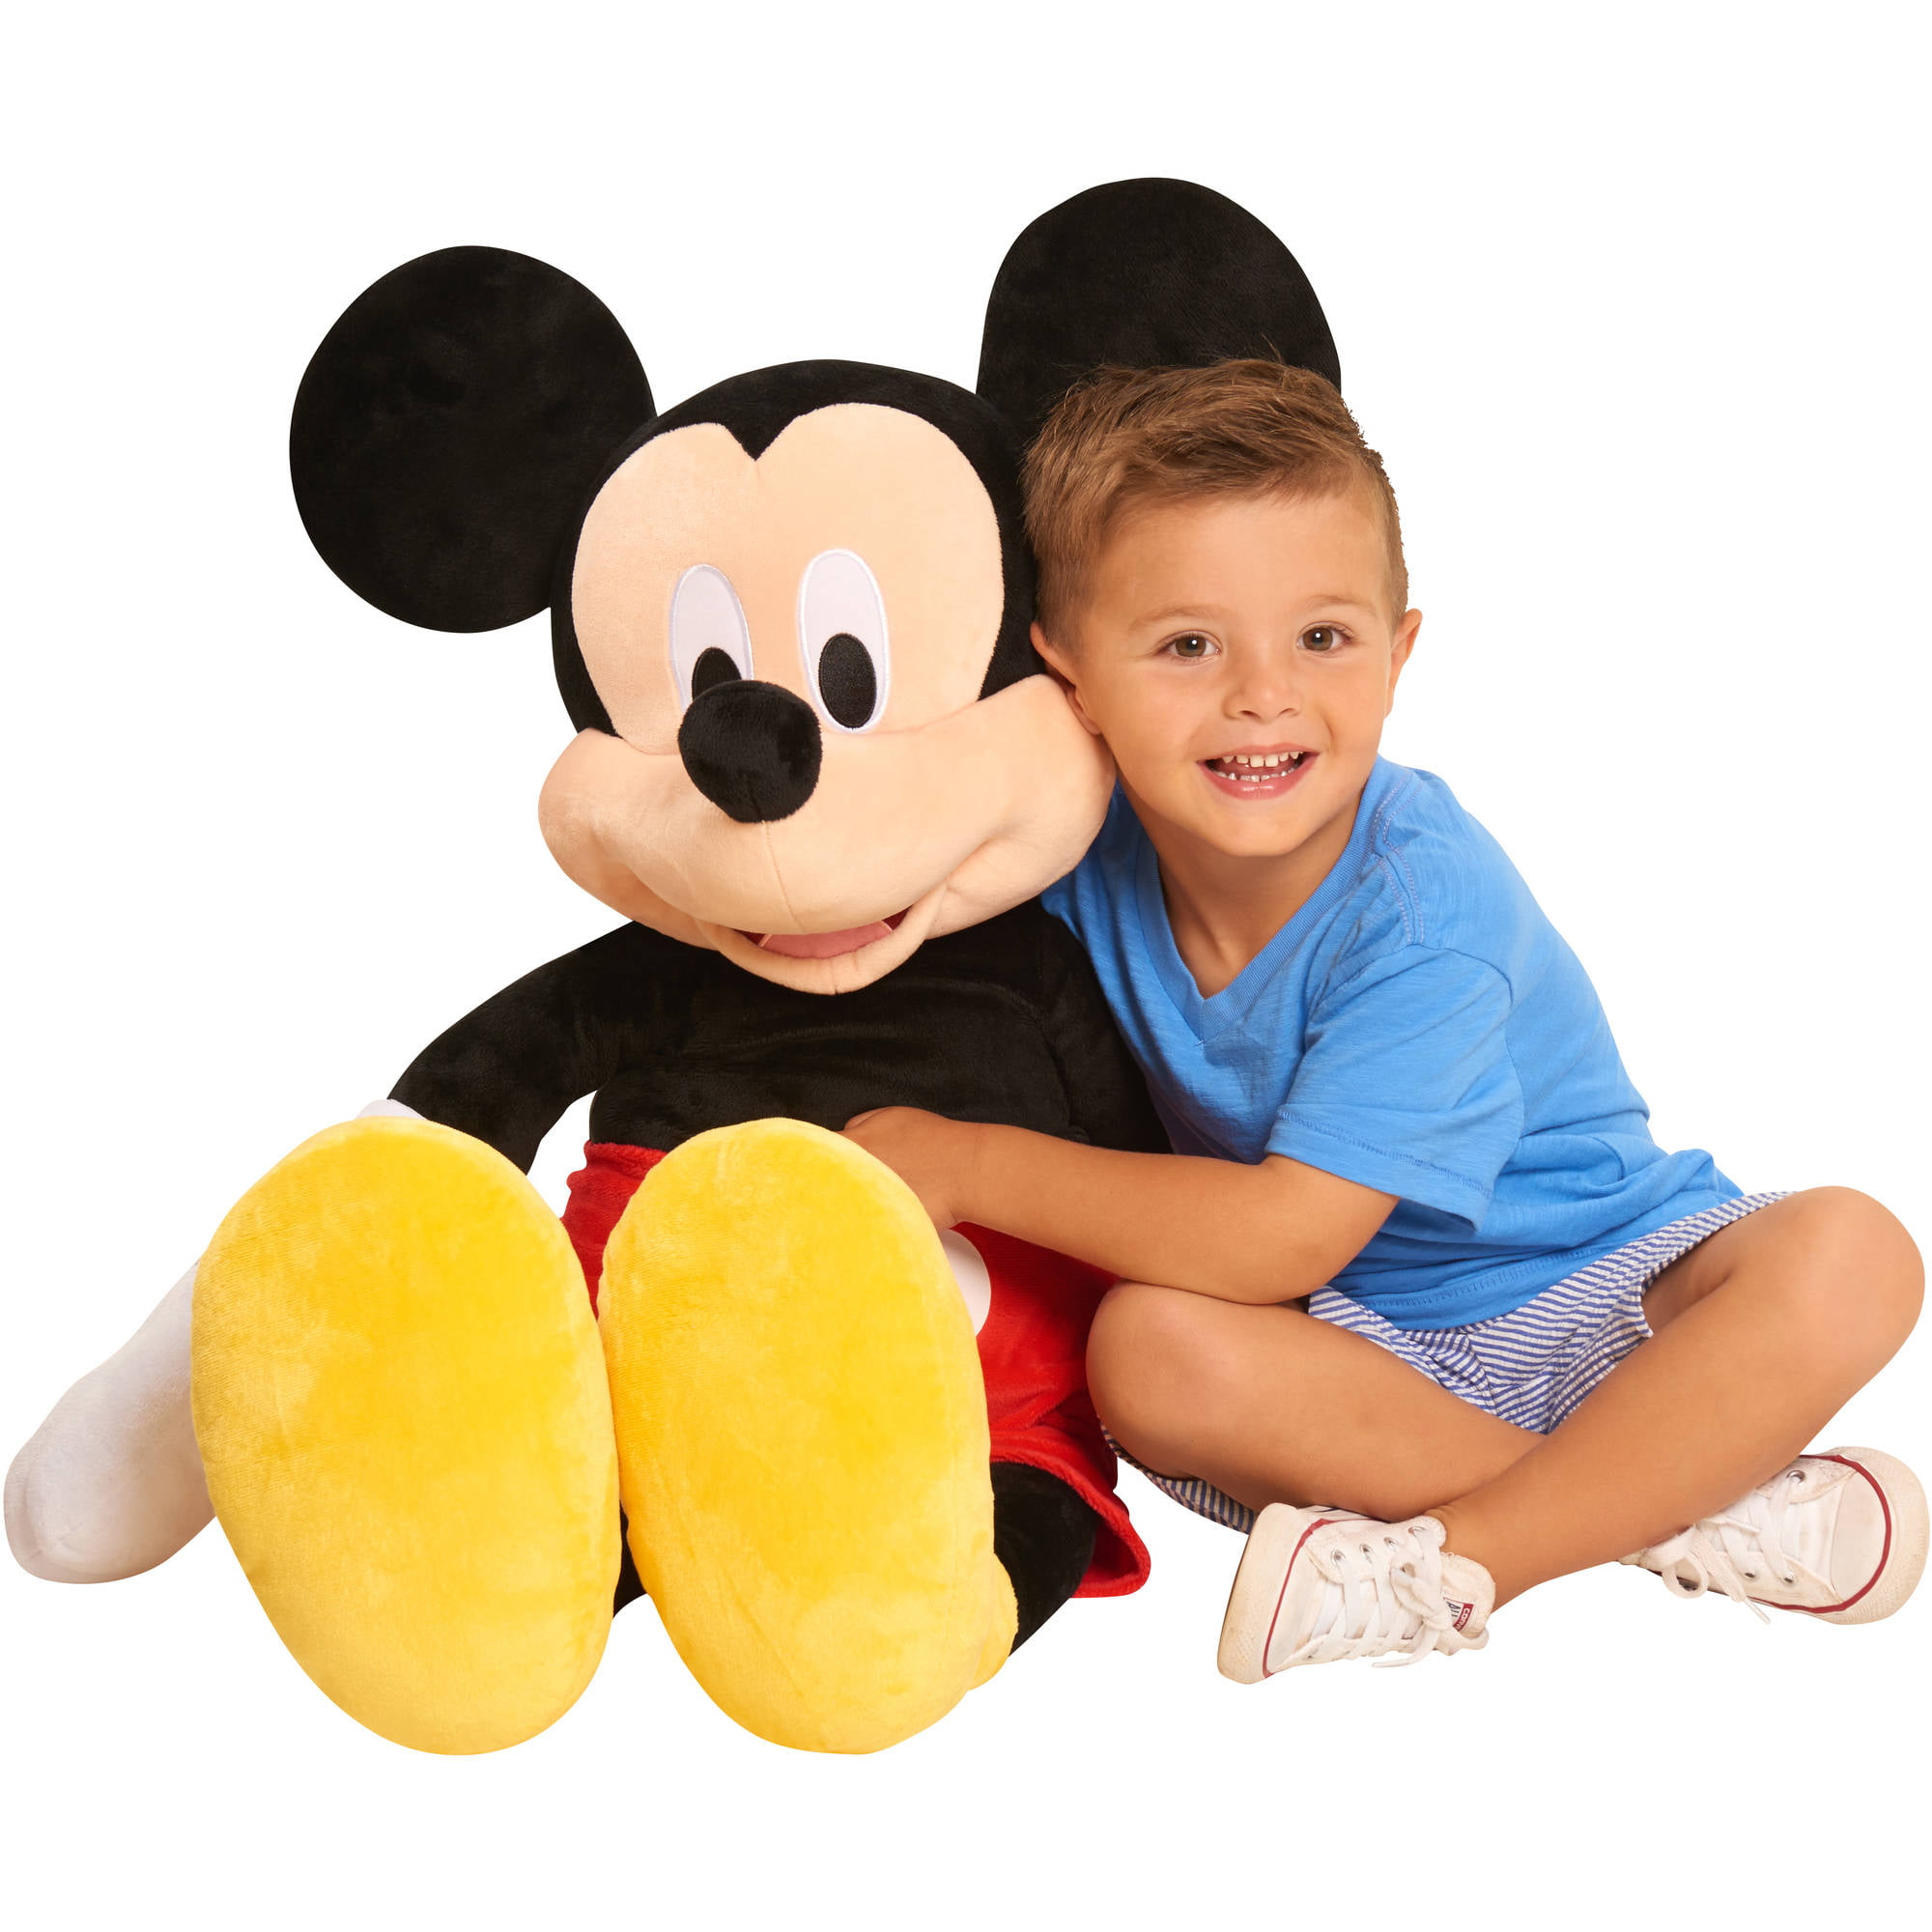 extra large mickey mouse plush